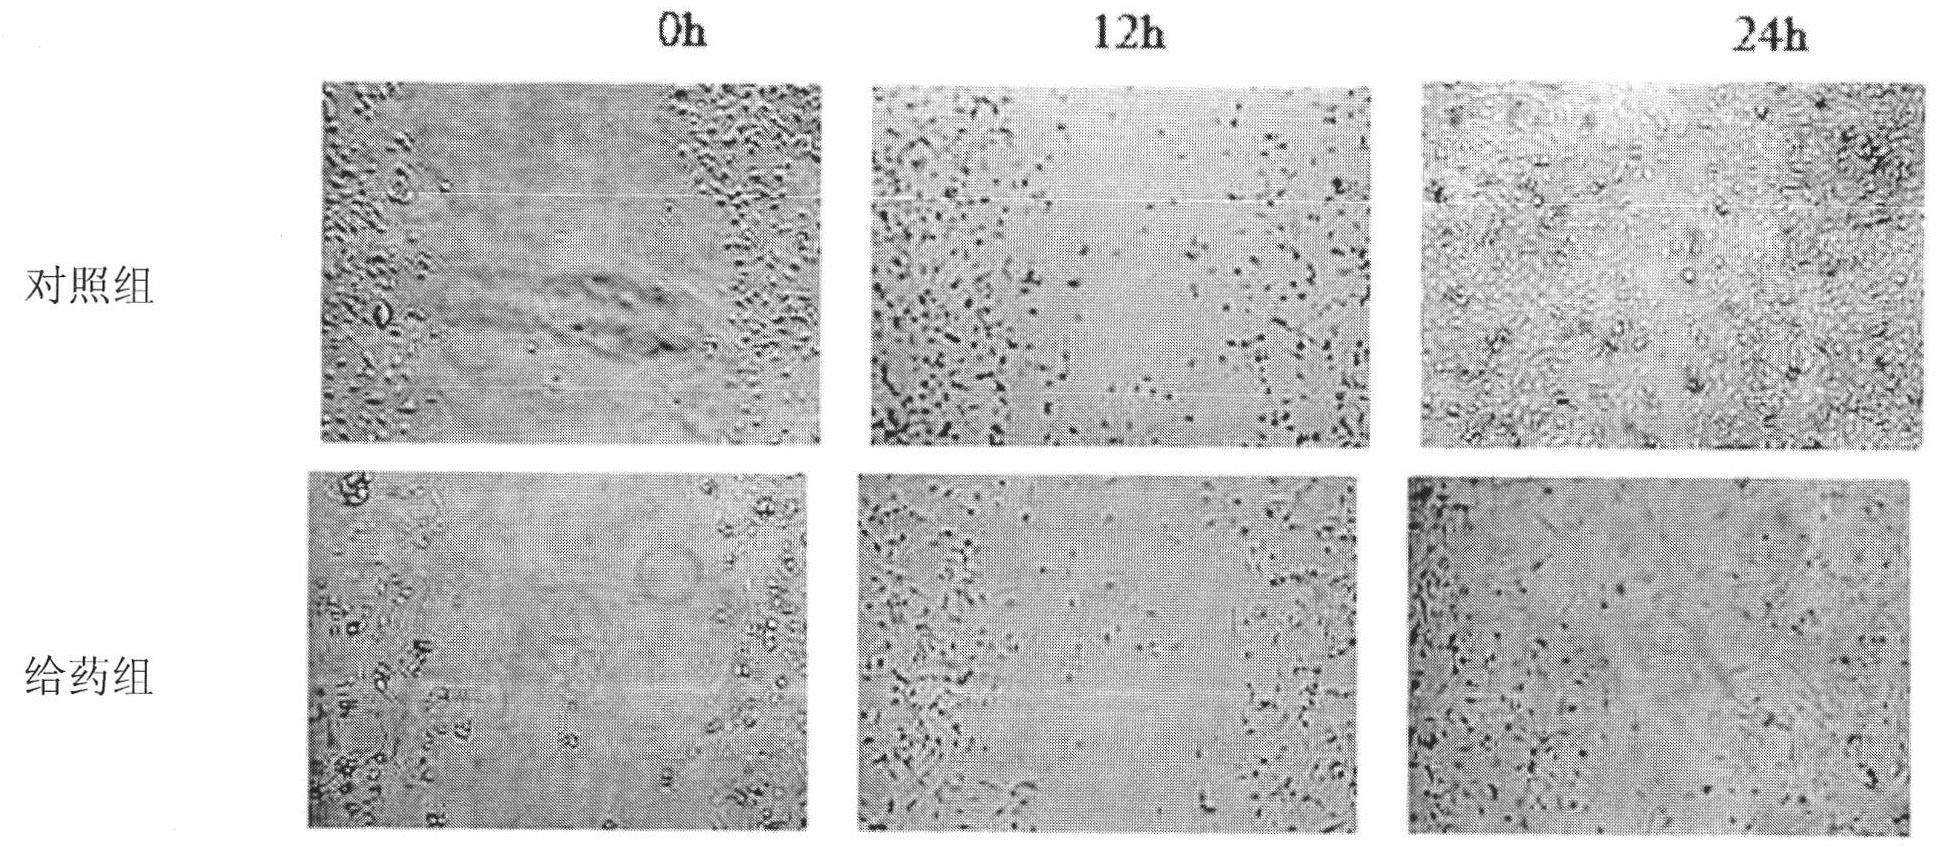 Preparation and application of low-toxicity effective fraction for suppressing angiogenesis in cowherb seed